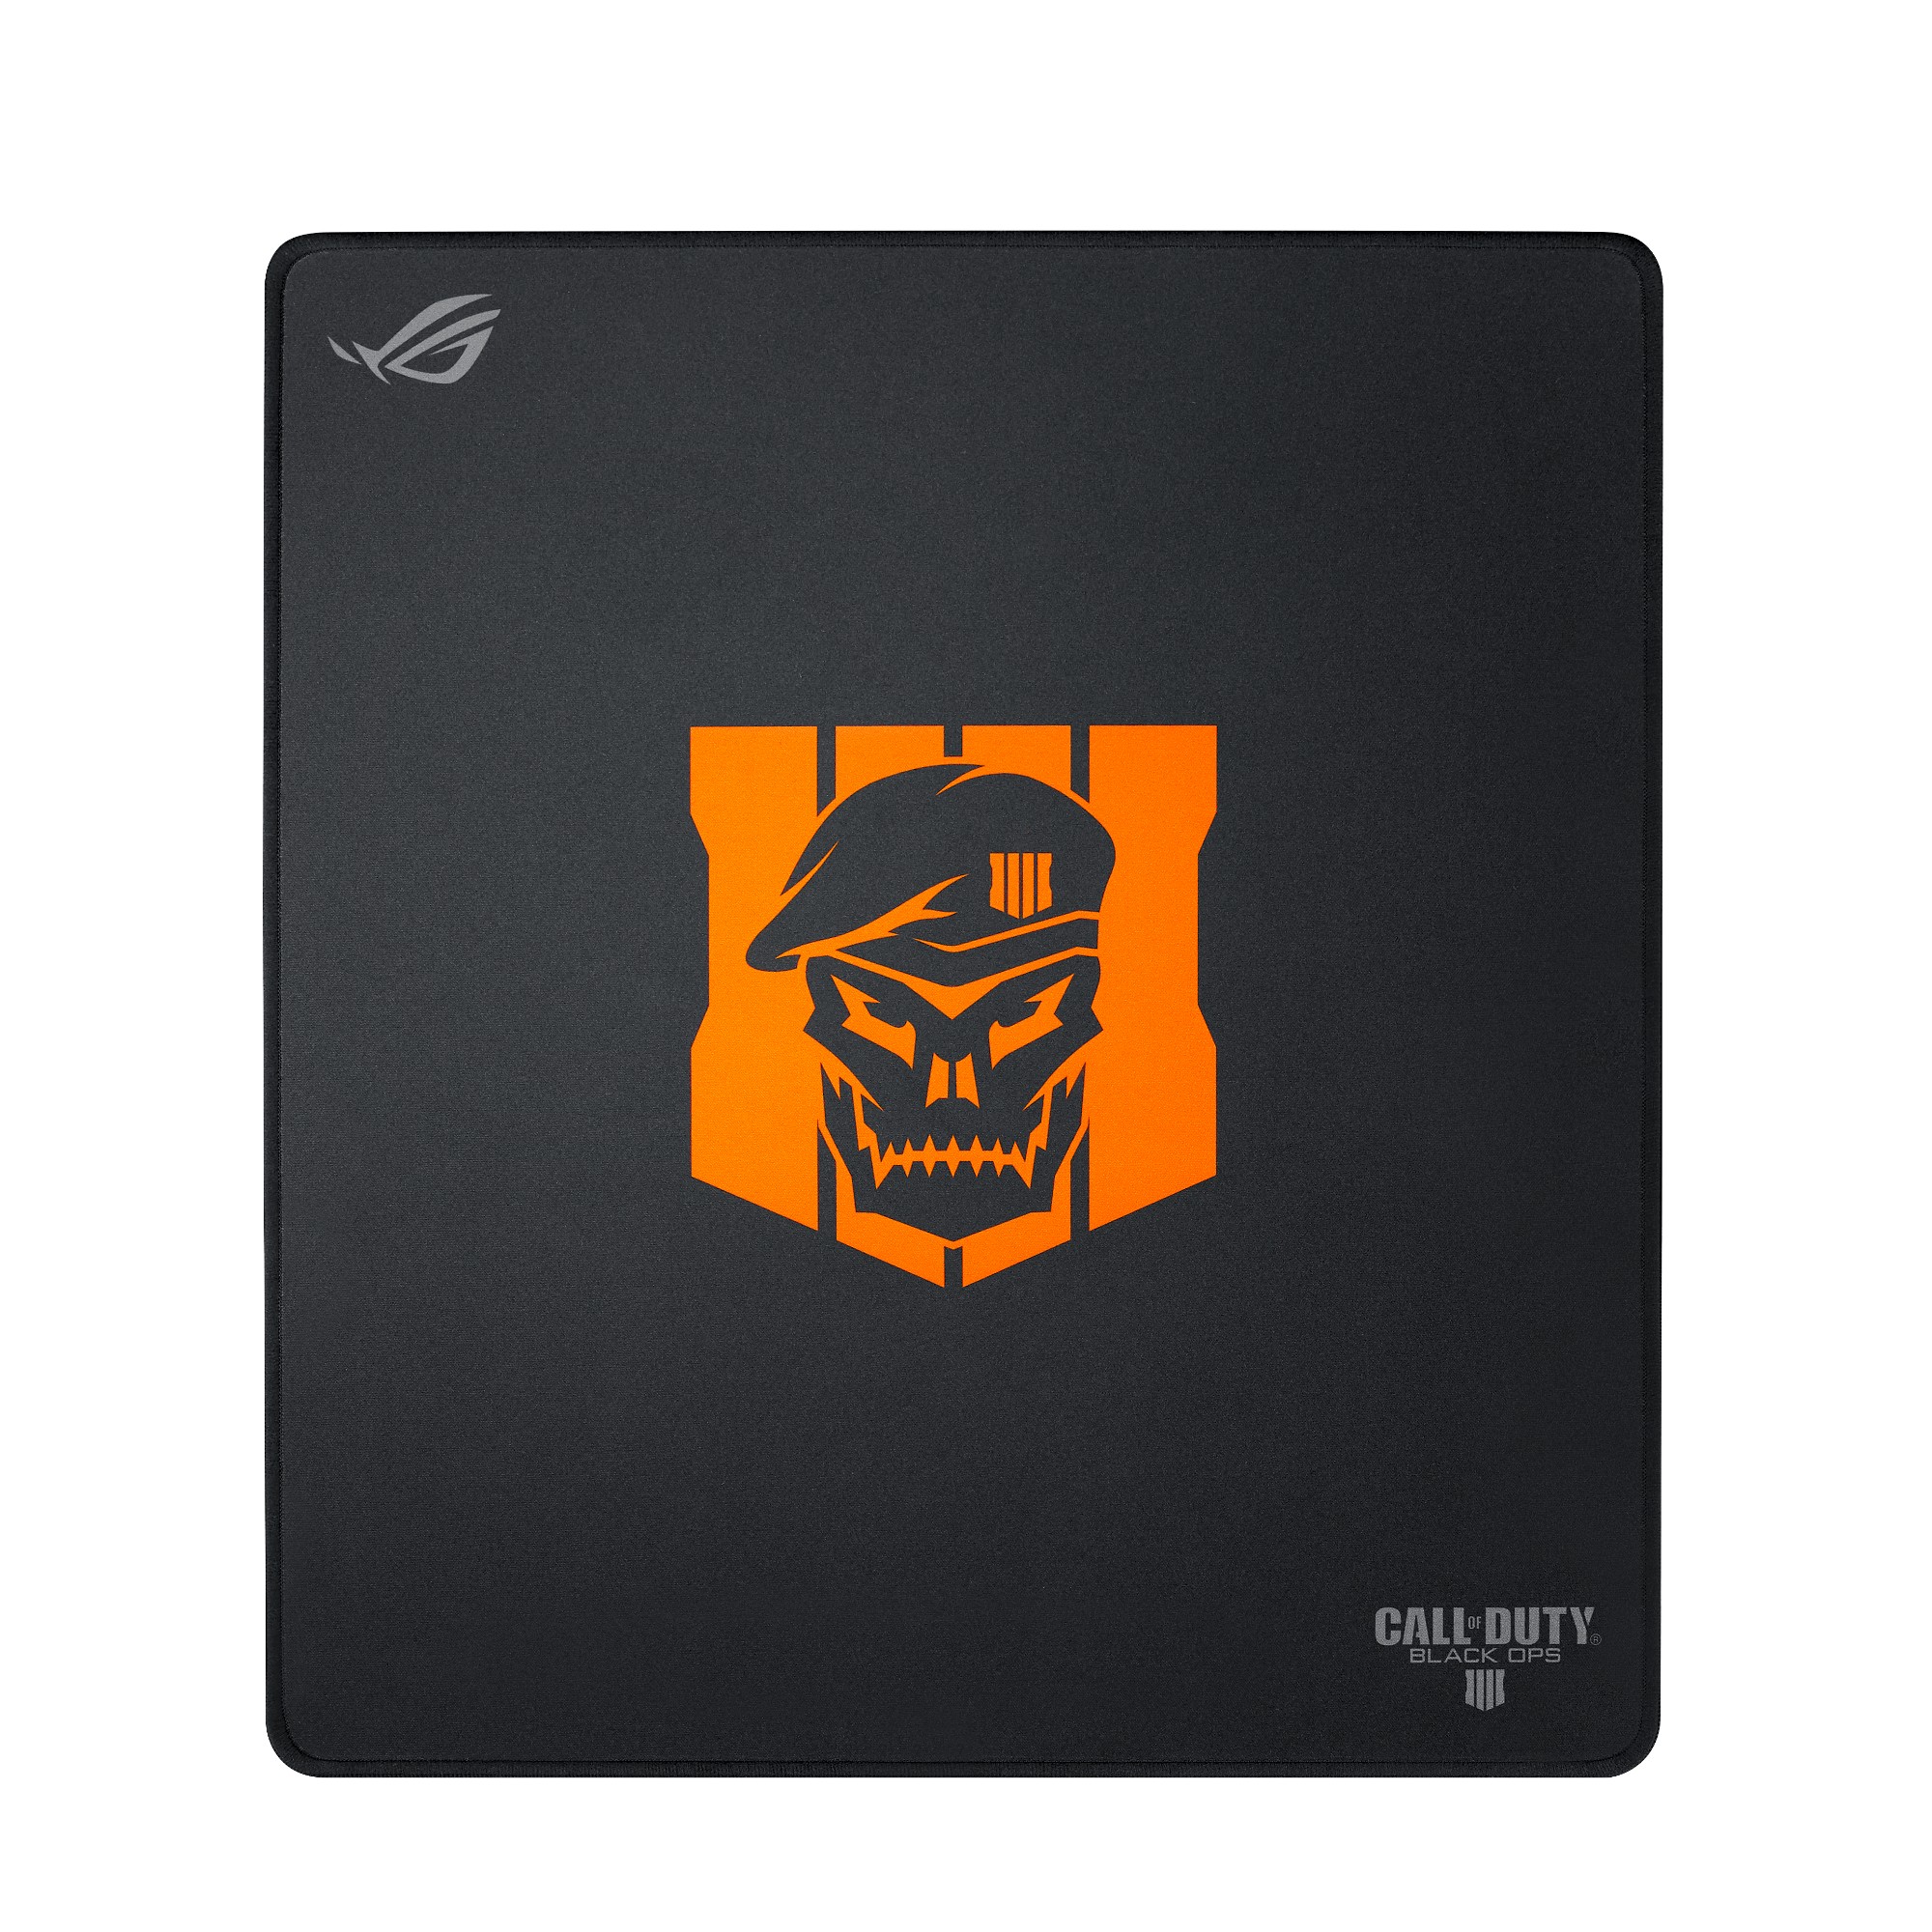 90MP00T1-B0UA00 ASUS ROG Strix Edge Call of Duty Black Ops 4 Edition Gaming Surface (90MP00T1-B0